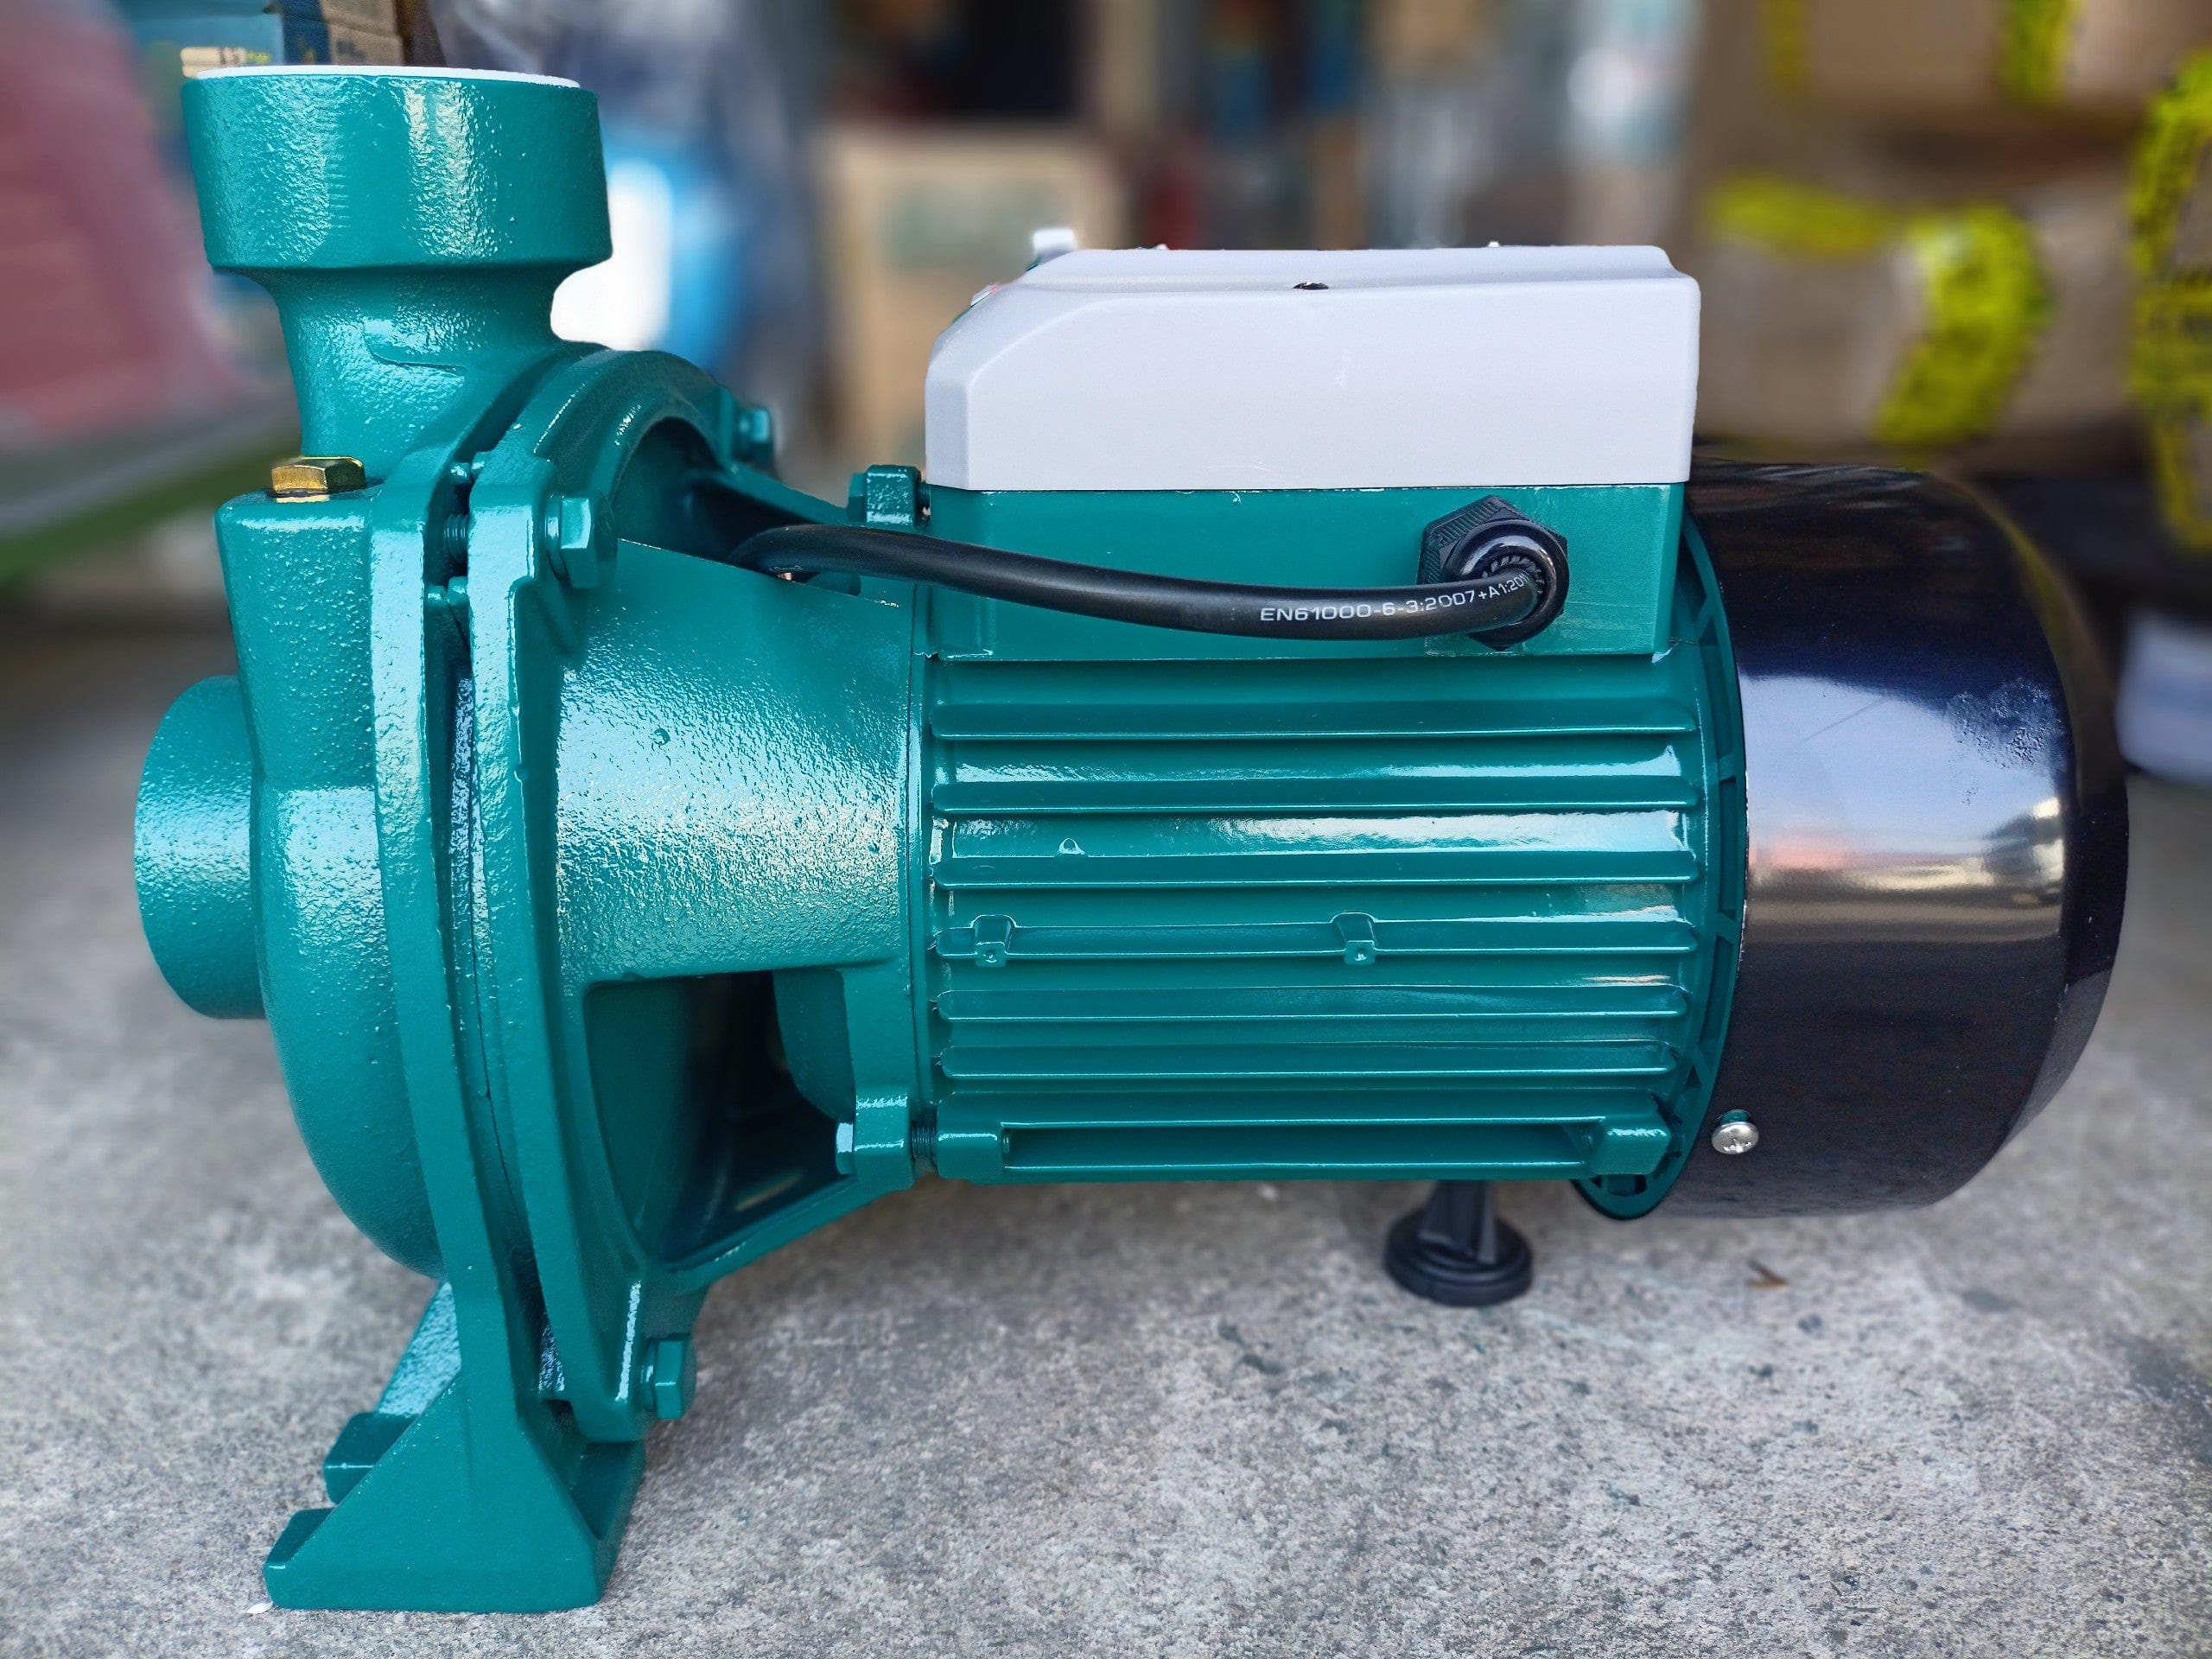 Total Centrifugal Pump 1500W (2Hp) - TWP215002 | Supply Master Accra, Ghana Centrifugal Pumps Buy Tools hardware Building materials